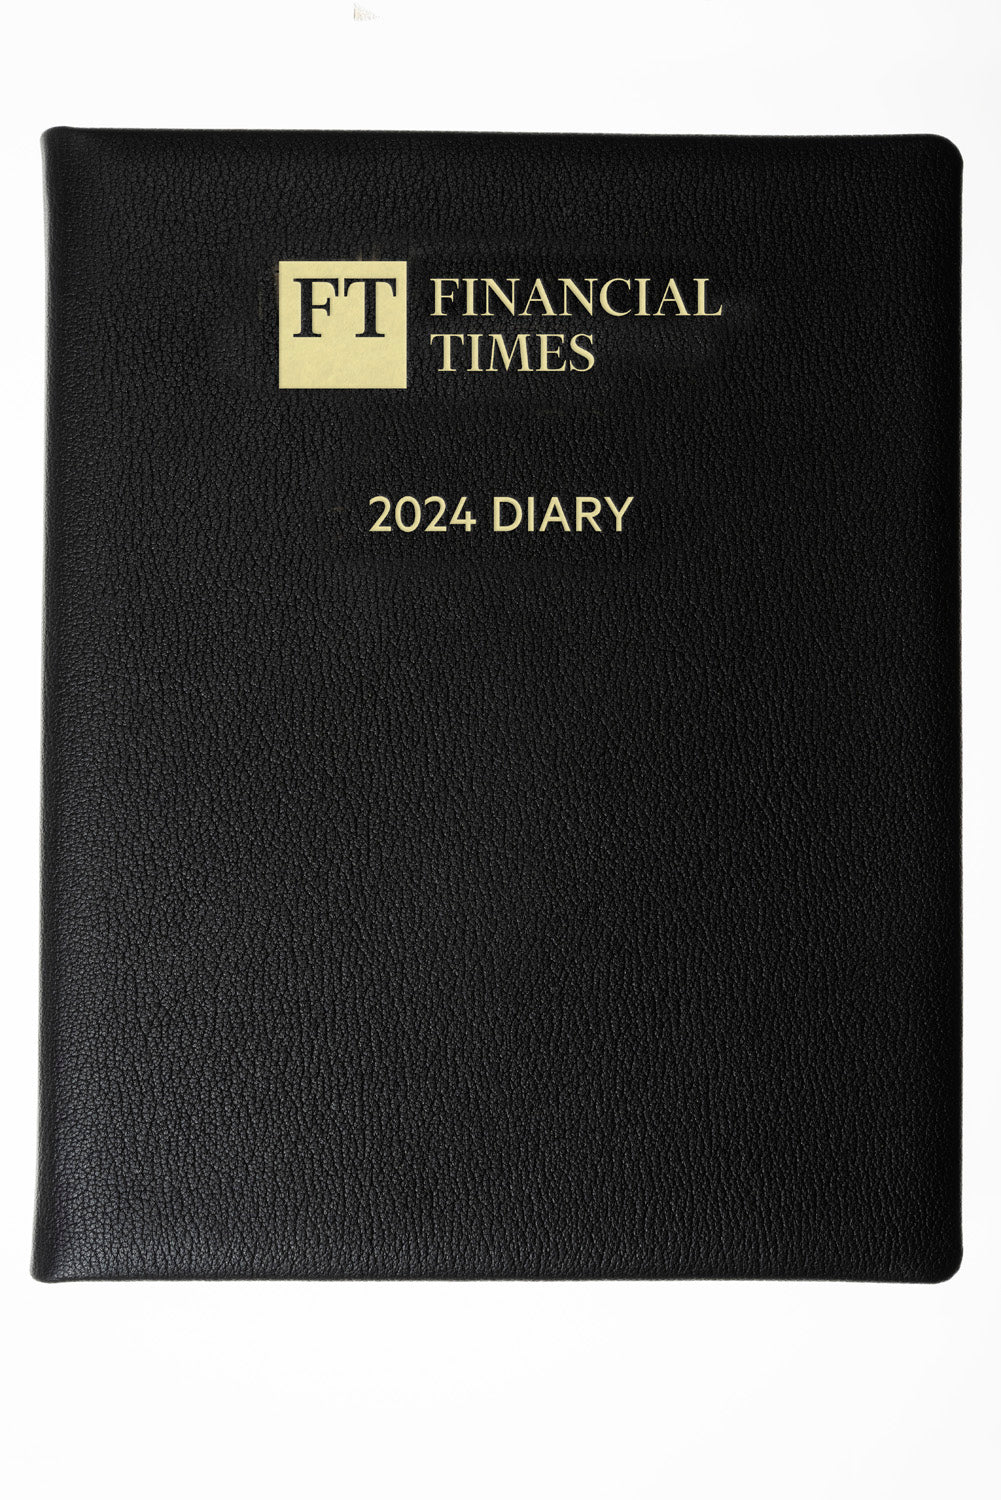 Financial Times - 2024 -Leather Desk Diary - Week to View- Black